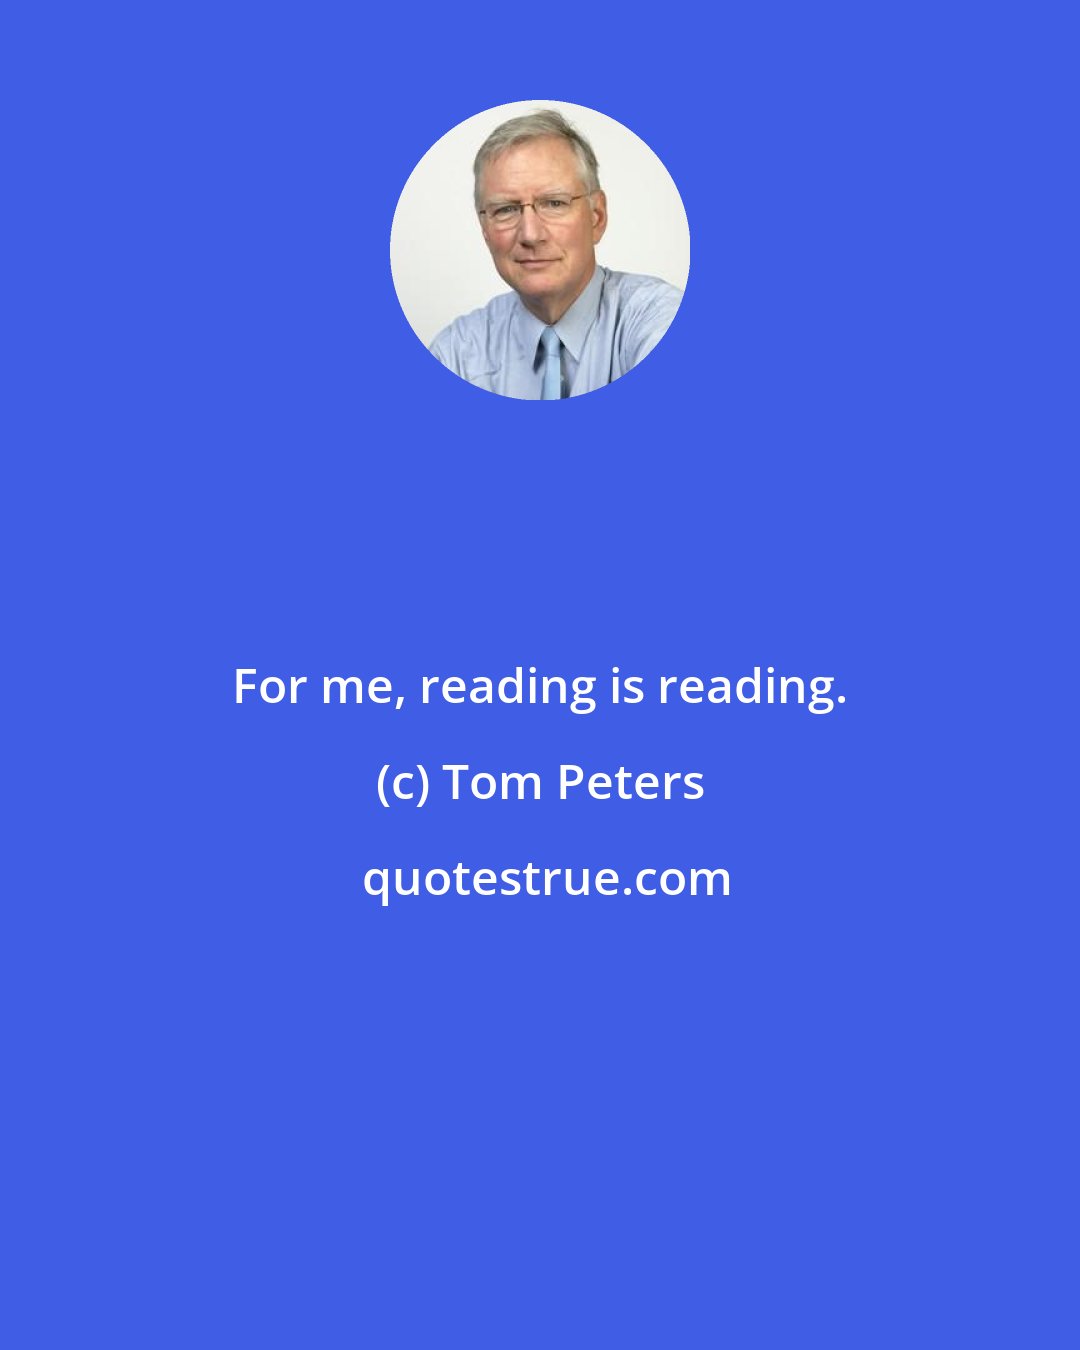 Tom Peters: For me, reading is reading.